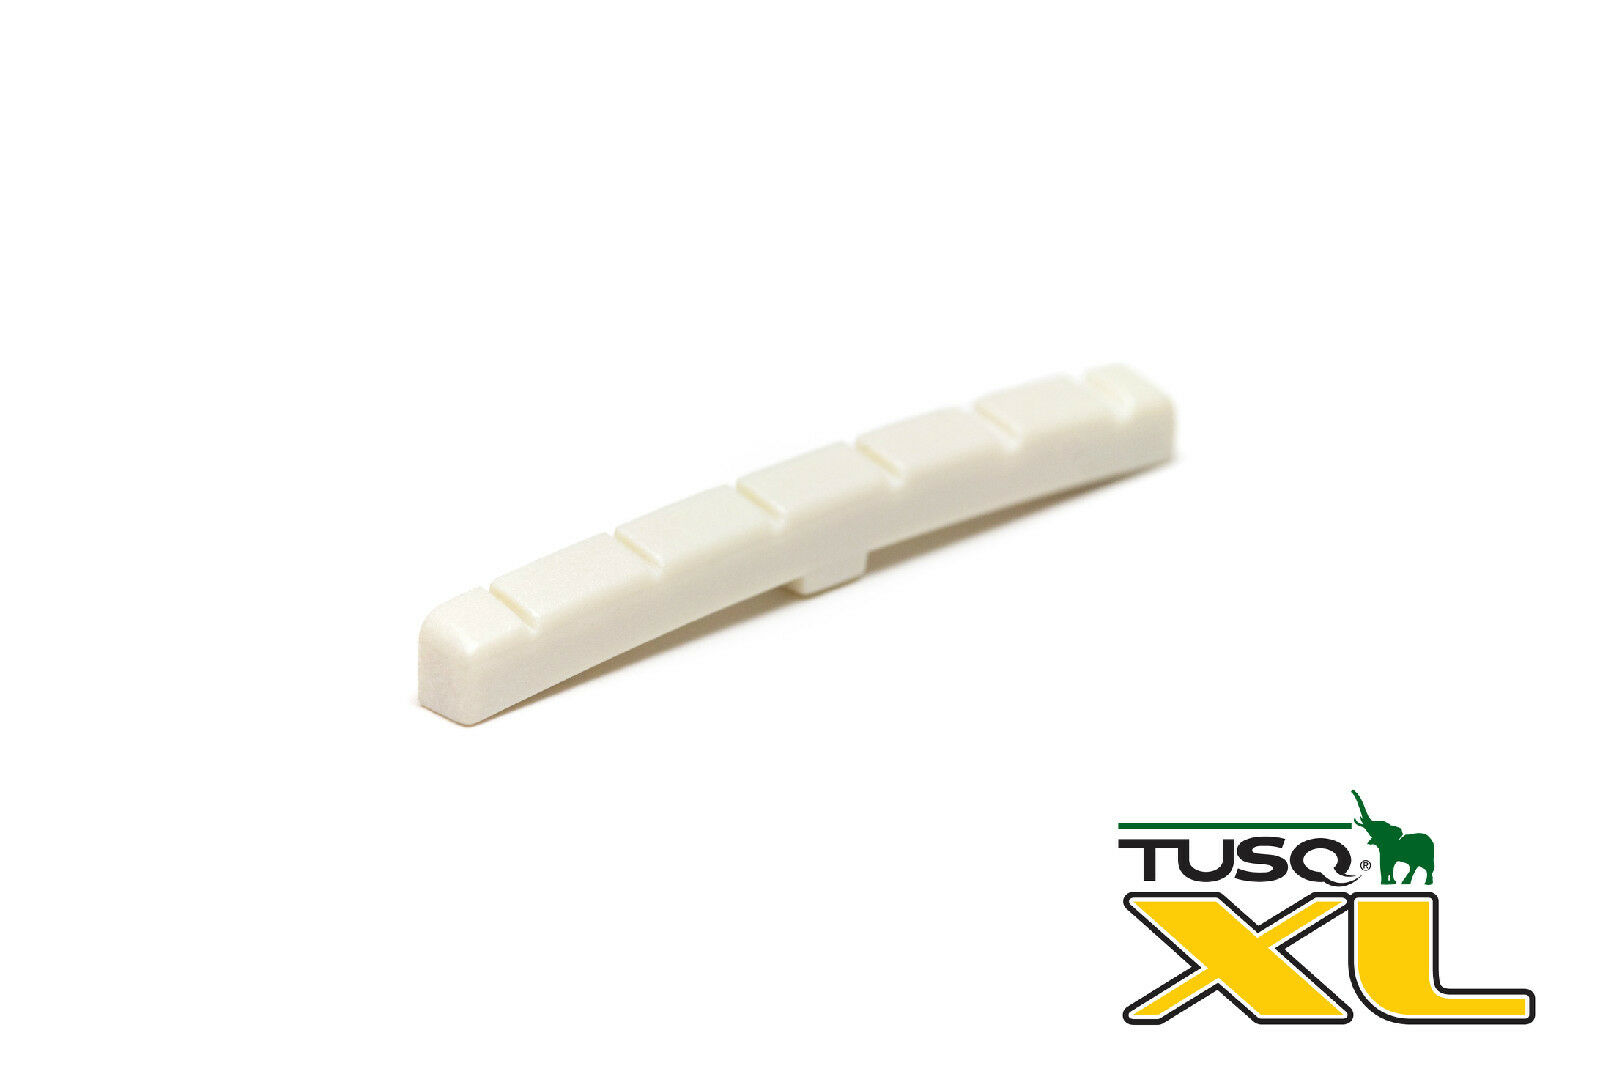 Genuine Graph Tech Tusq Xl Pql-5000-00 Slotted Fender Style Nut - New